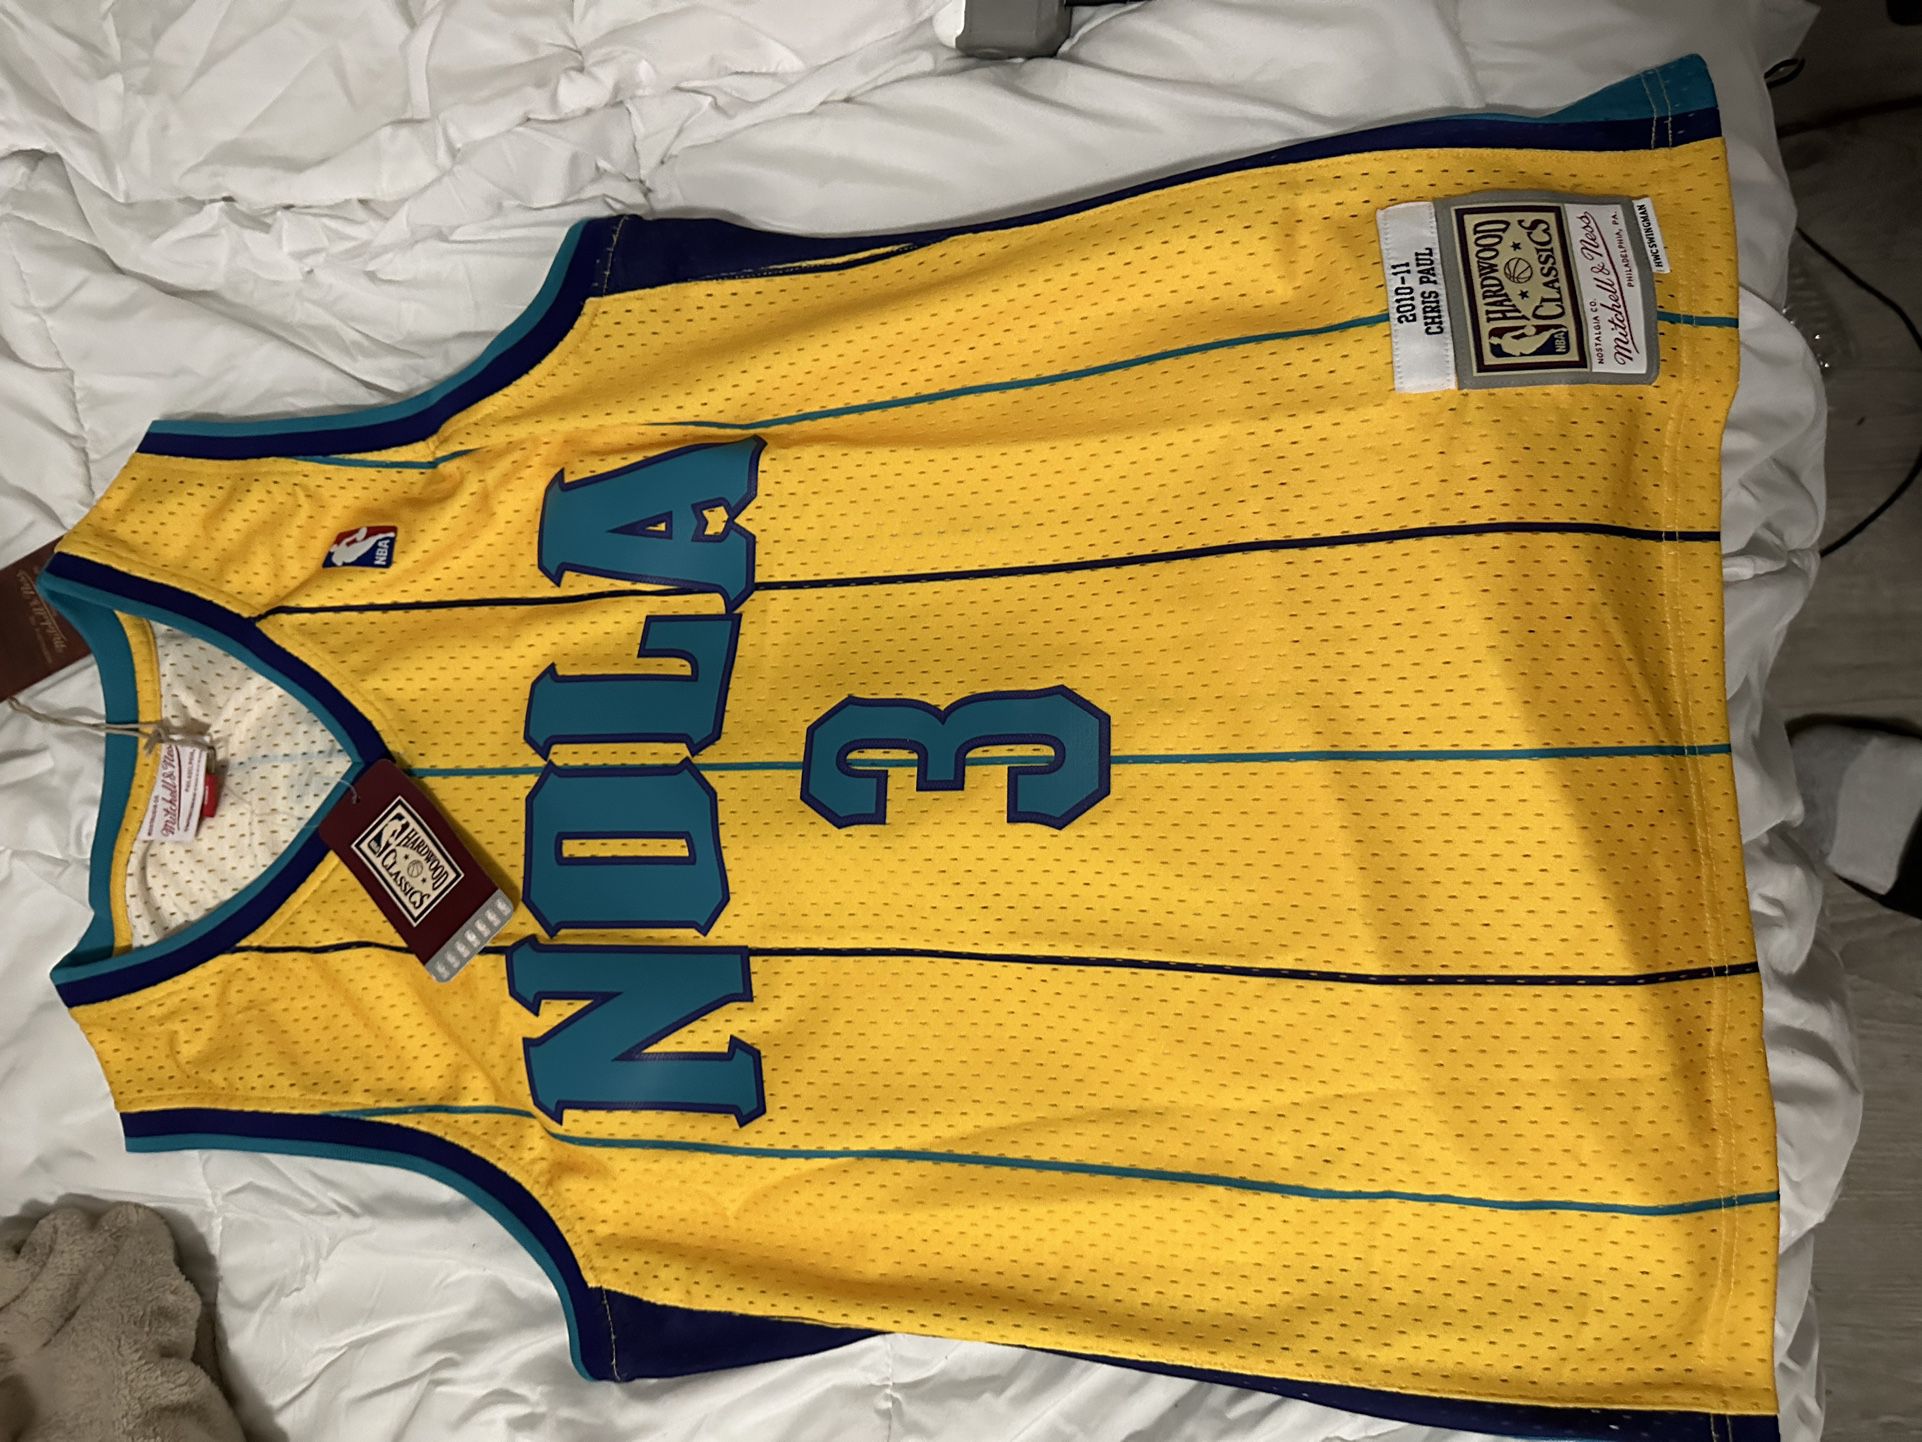 Chris Paul Hornets Jersey for Sale in Peabody, MA - OfferUp